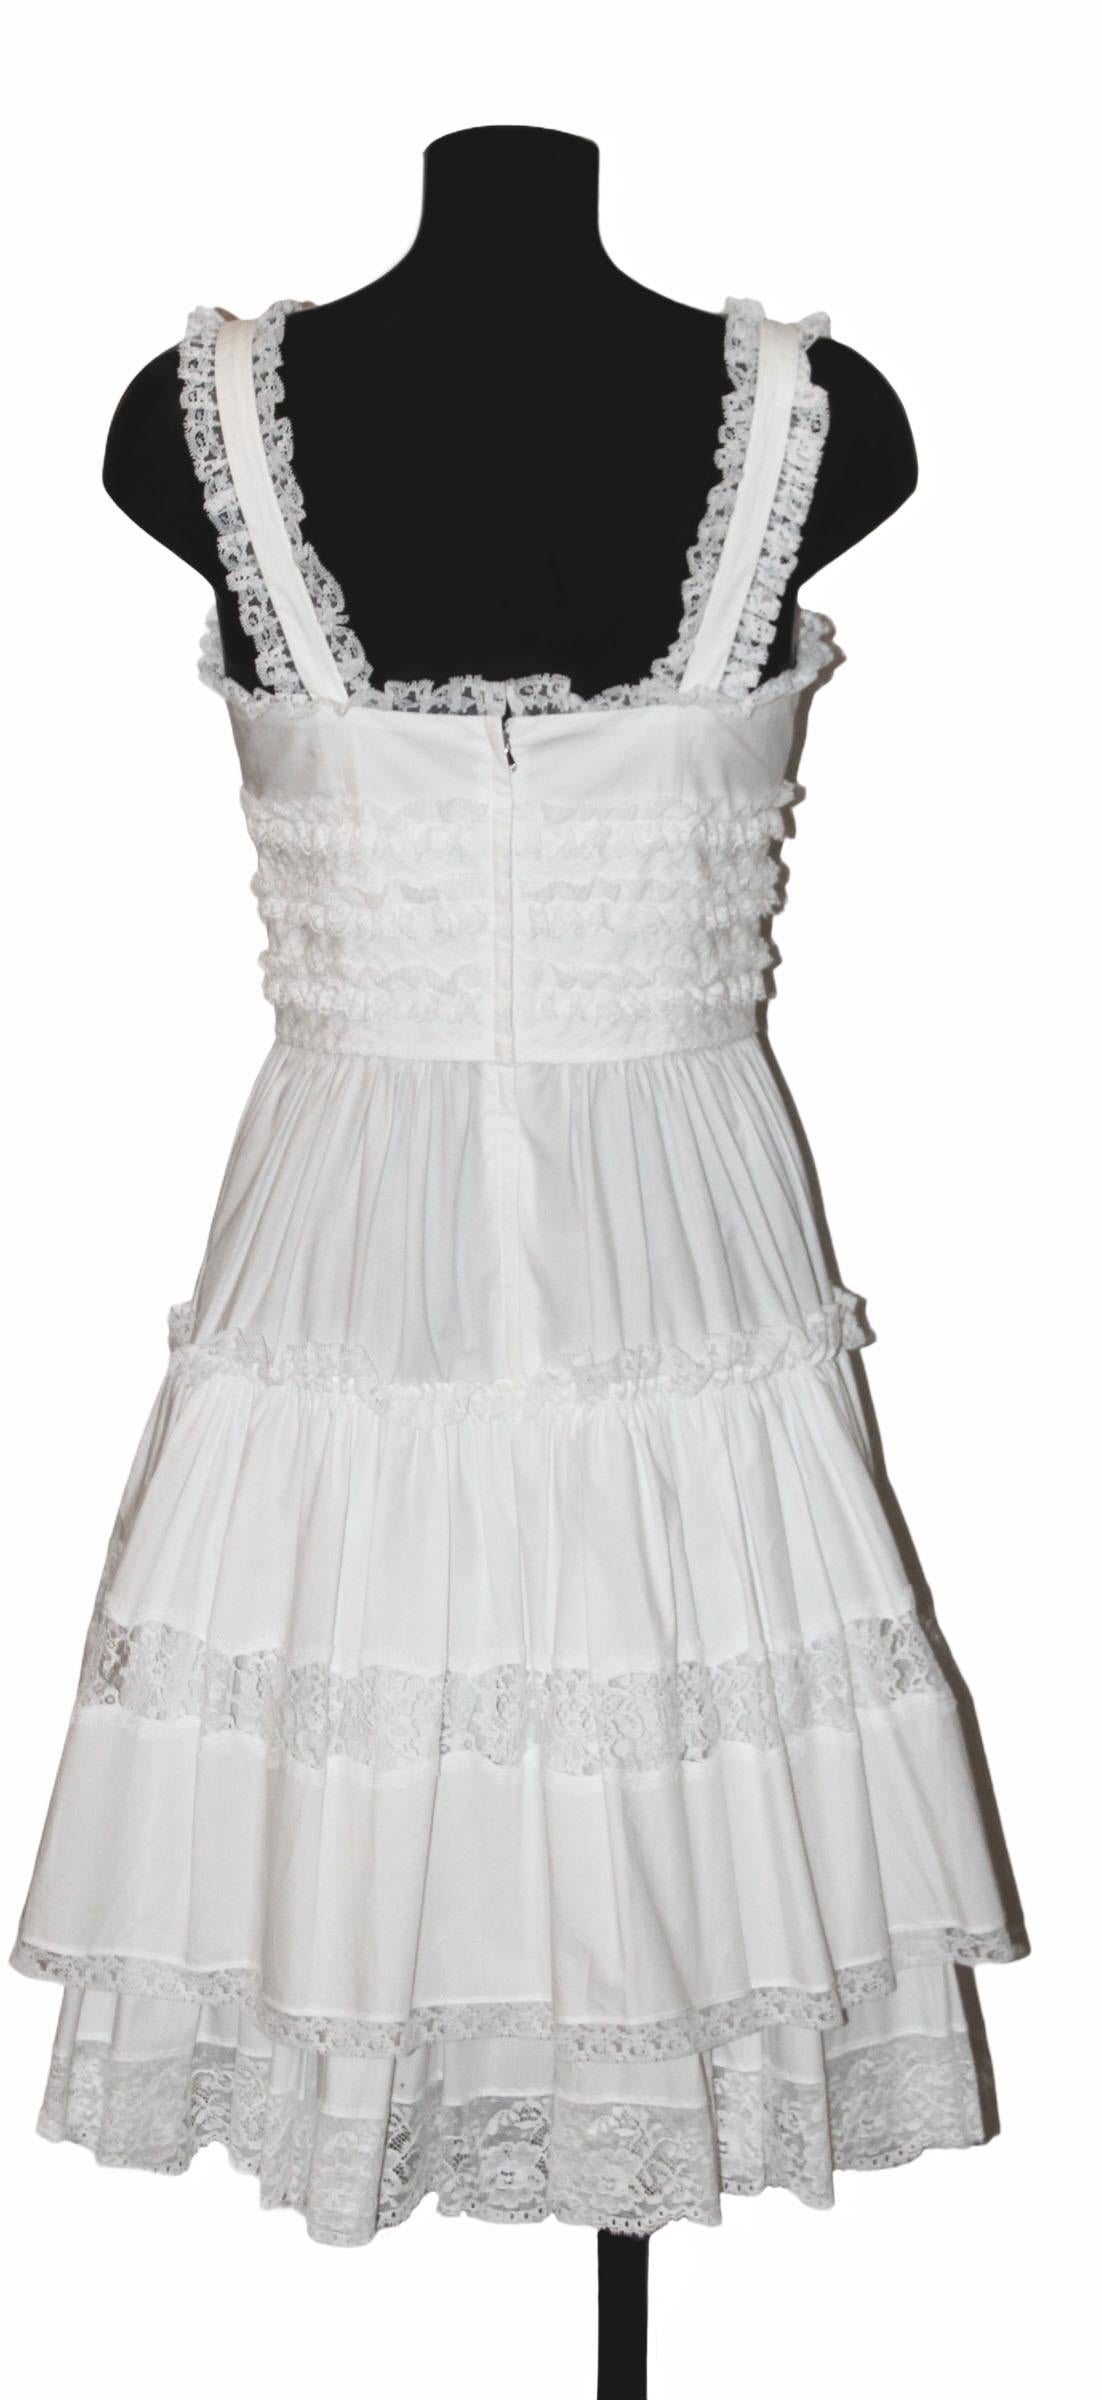 This elegant pre-owned dress from Dolce & Gabbana is crafted in a white cotton and lace trim inspired by 1900's Sicillian brides.
It features a sleeveless design with a fitted waist, a flared skirt with knee length.

Fabric: 85% cotton, 15%